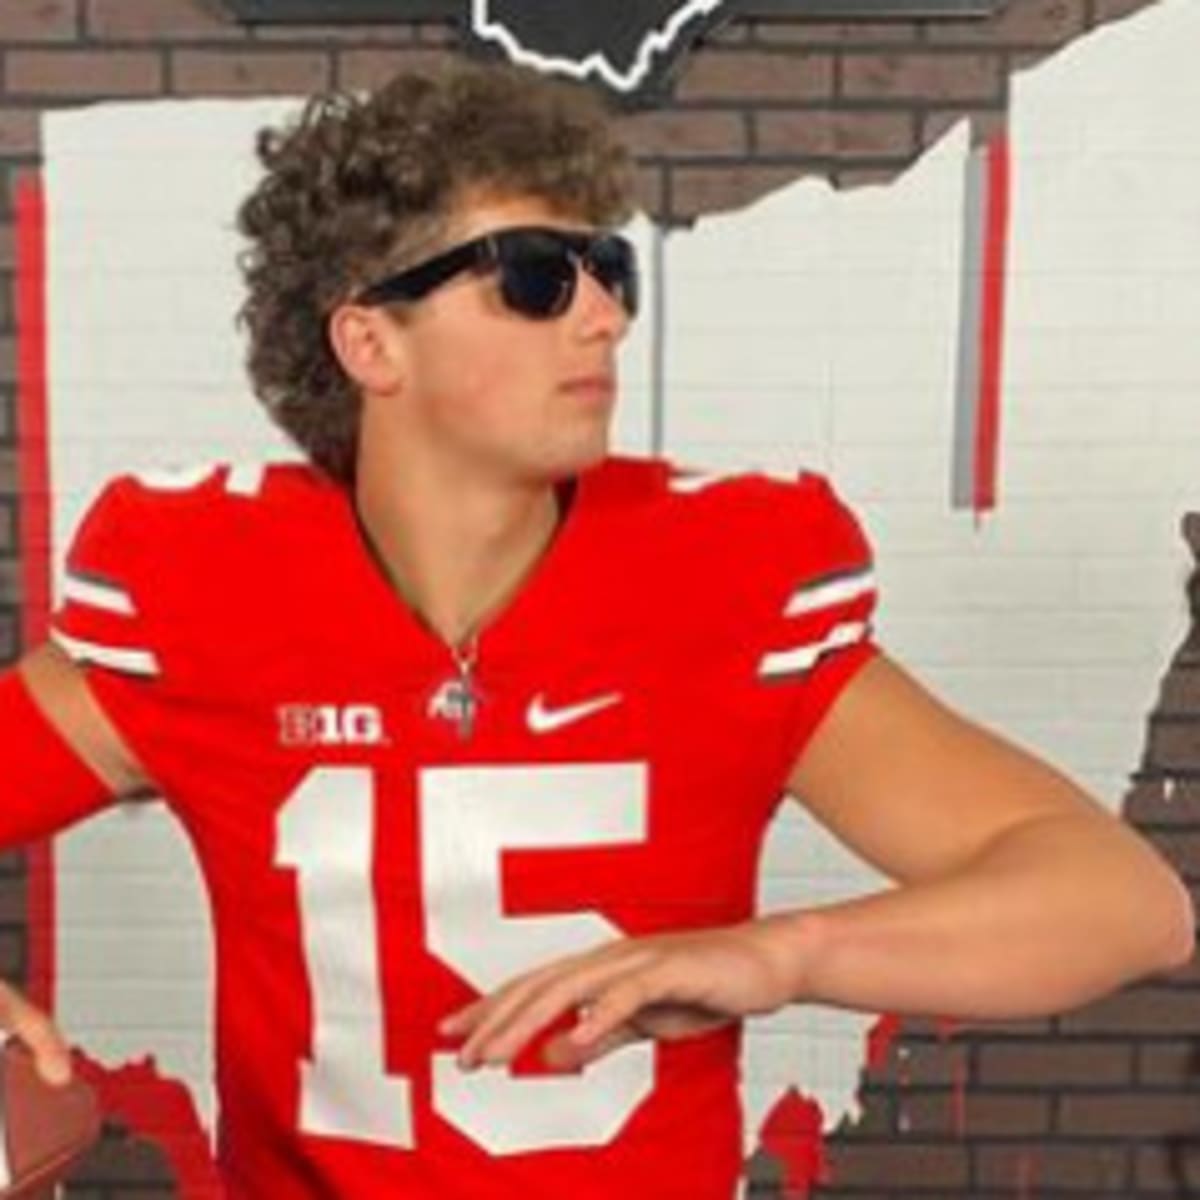 Ohio State football still in mix for top safety in 2023 recruiting class